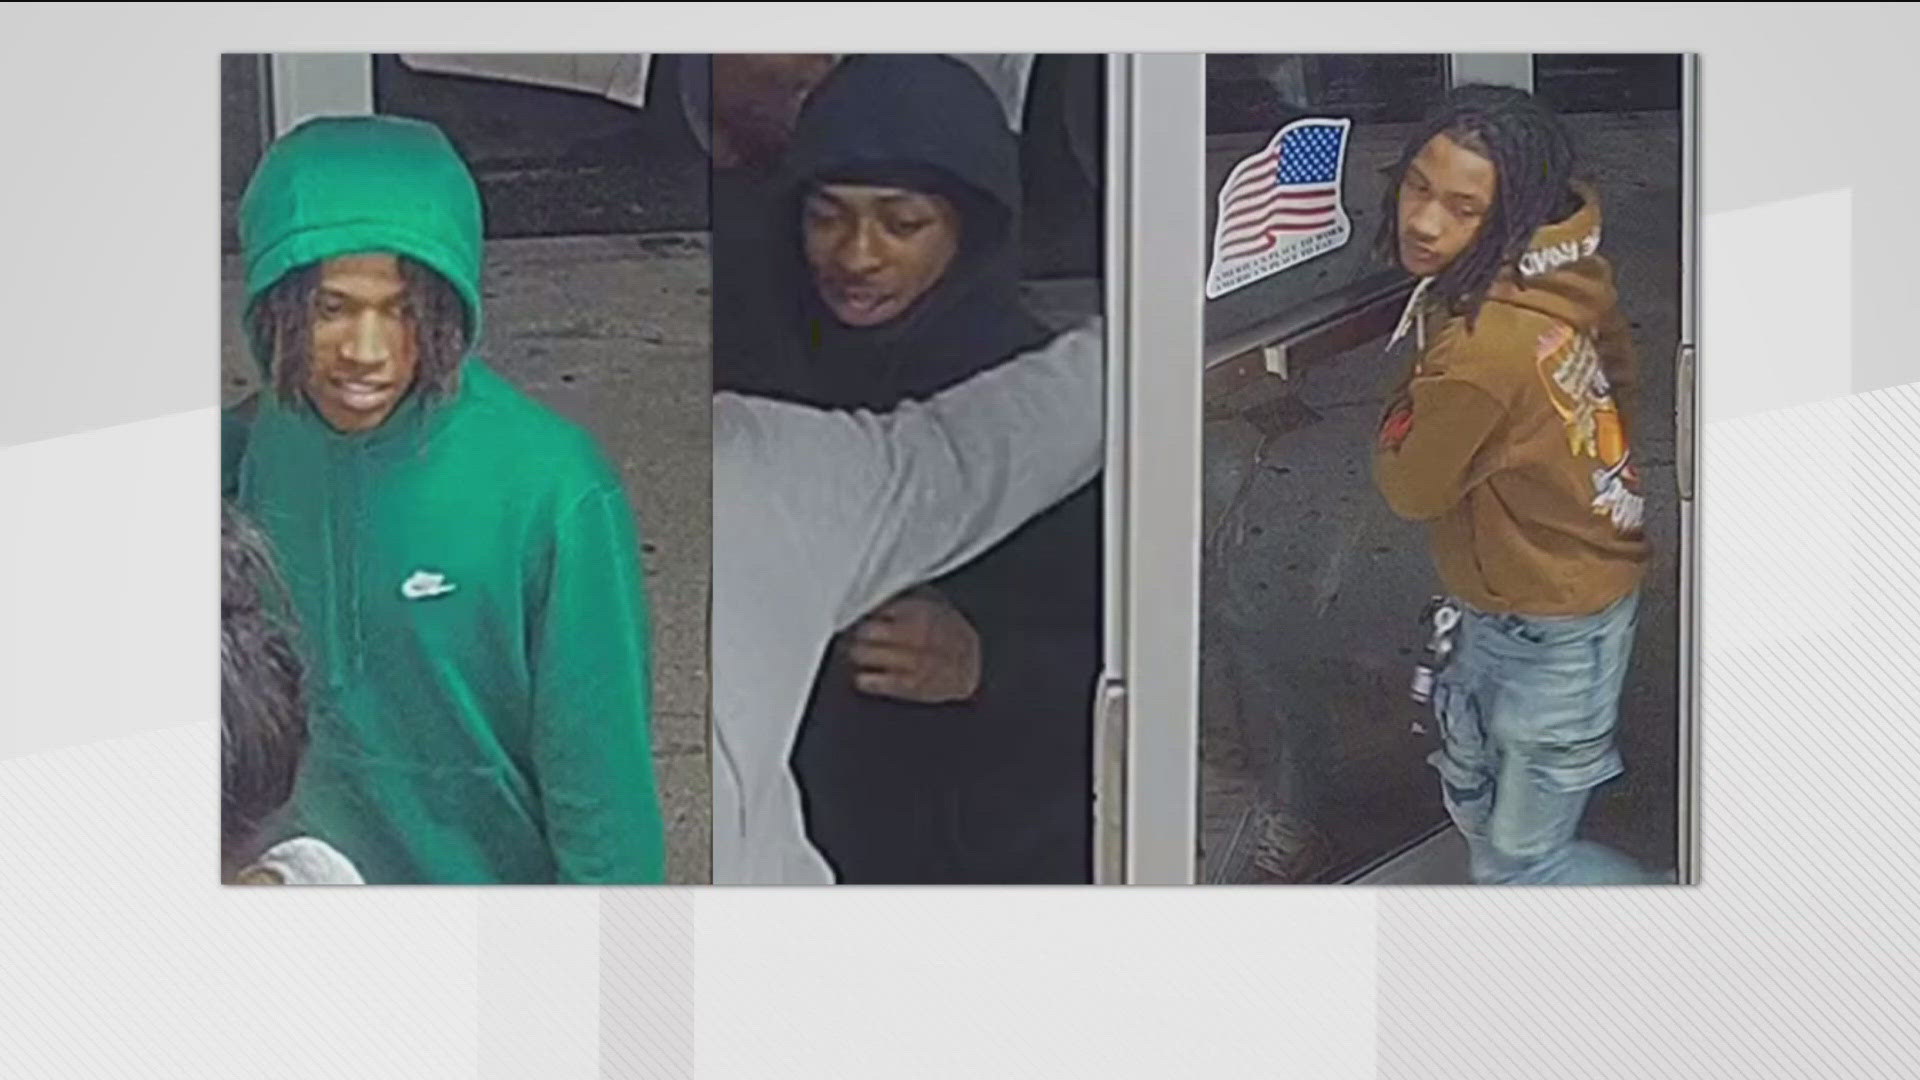 Police released photos on Wednesday of three persons of interest in the case.